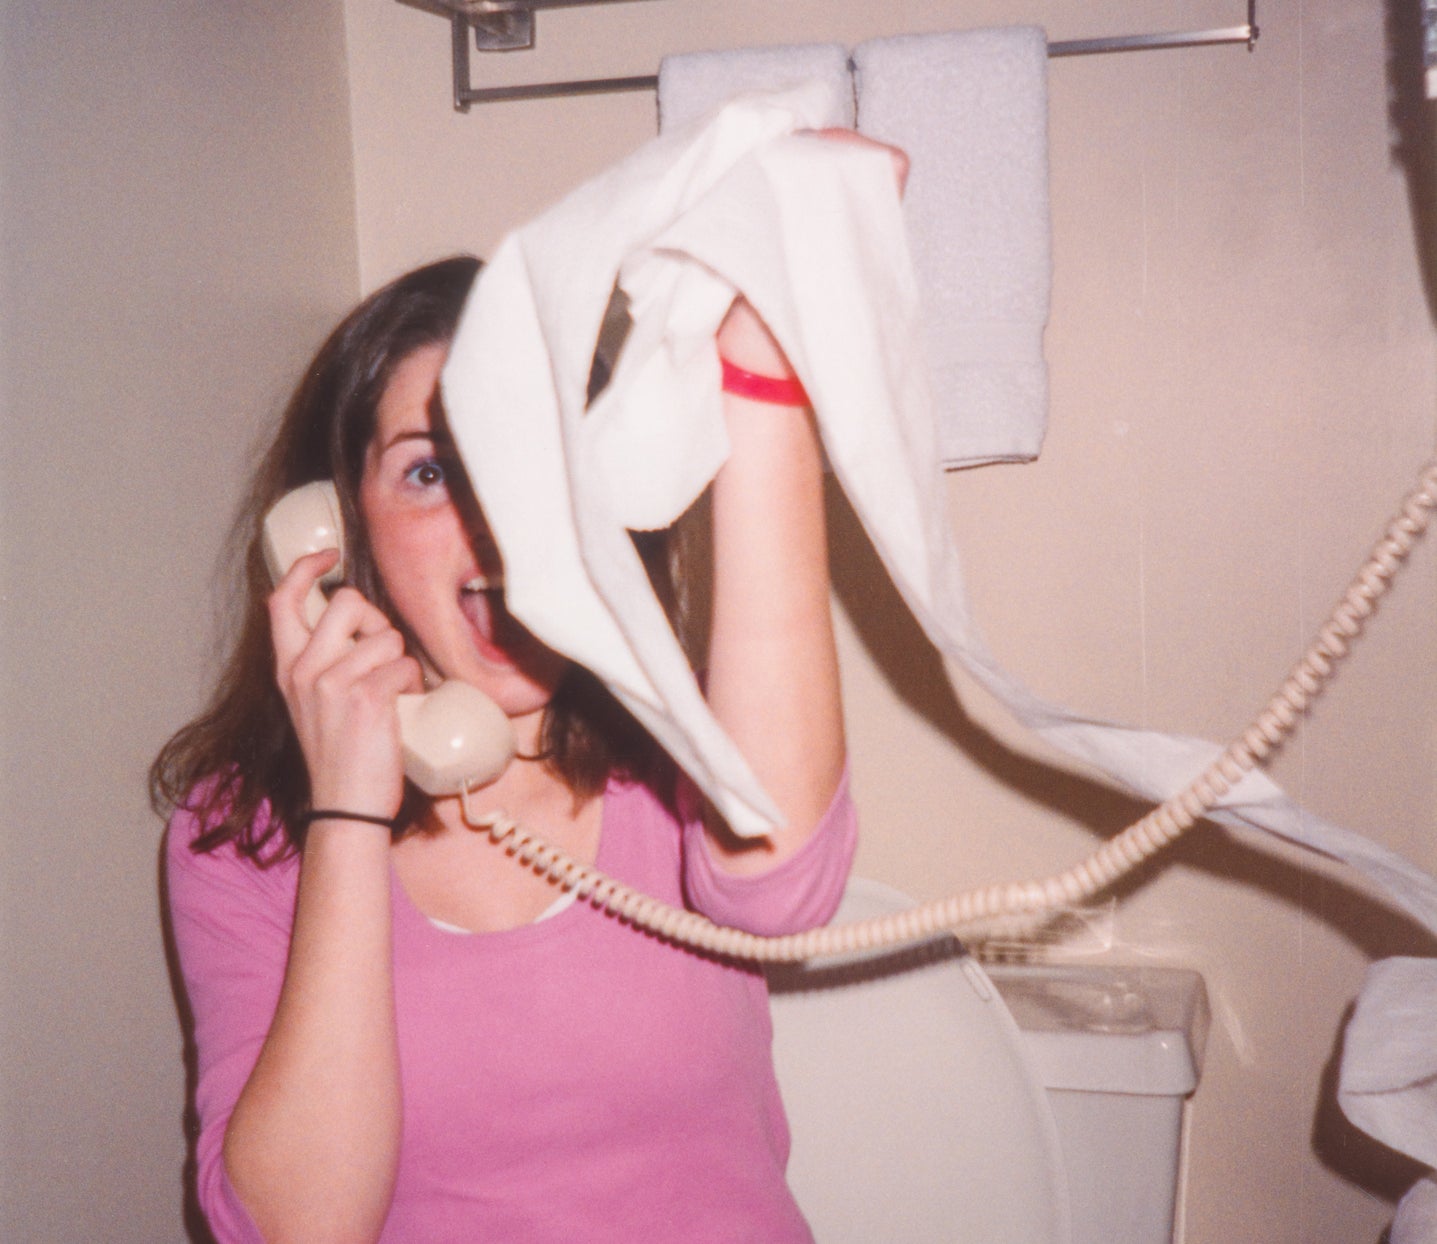 Woman on a corded phone making a face, caught off guard, with a towel in her hand, standing in a bathroom